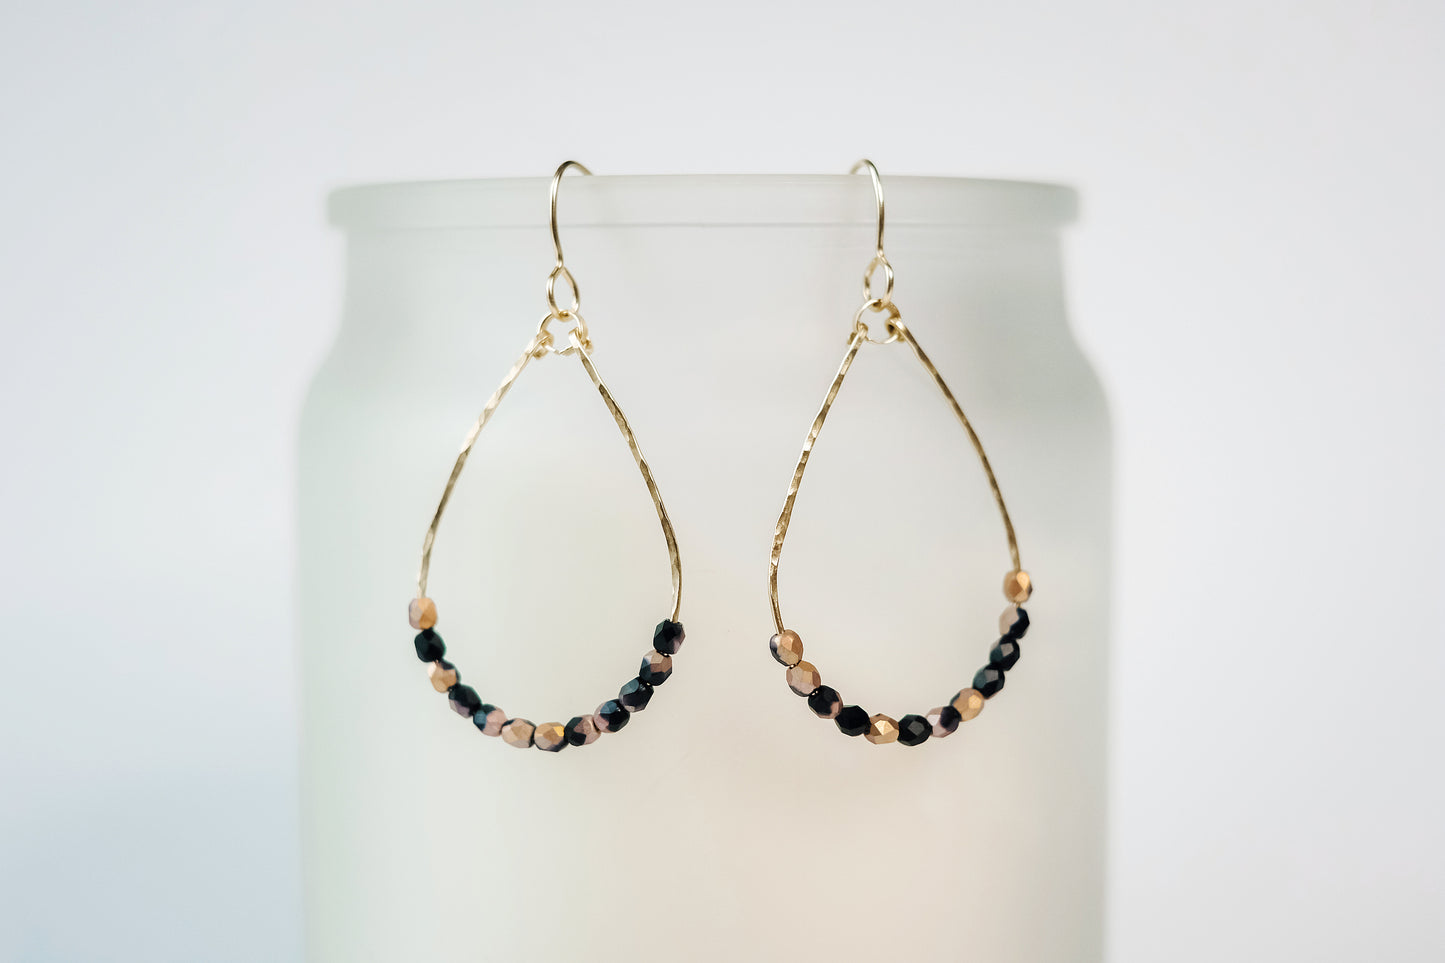 Gold wire teardrop shaped dangle earrings, strung with 12 black and pink speckled faceted glass beads that rest at the bottom of the teardrop shape, hanging from a beige colored cylinder.